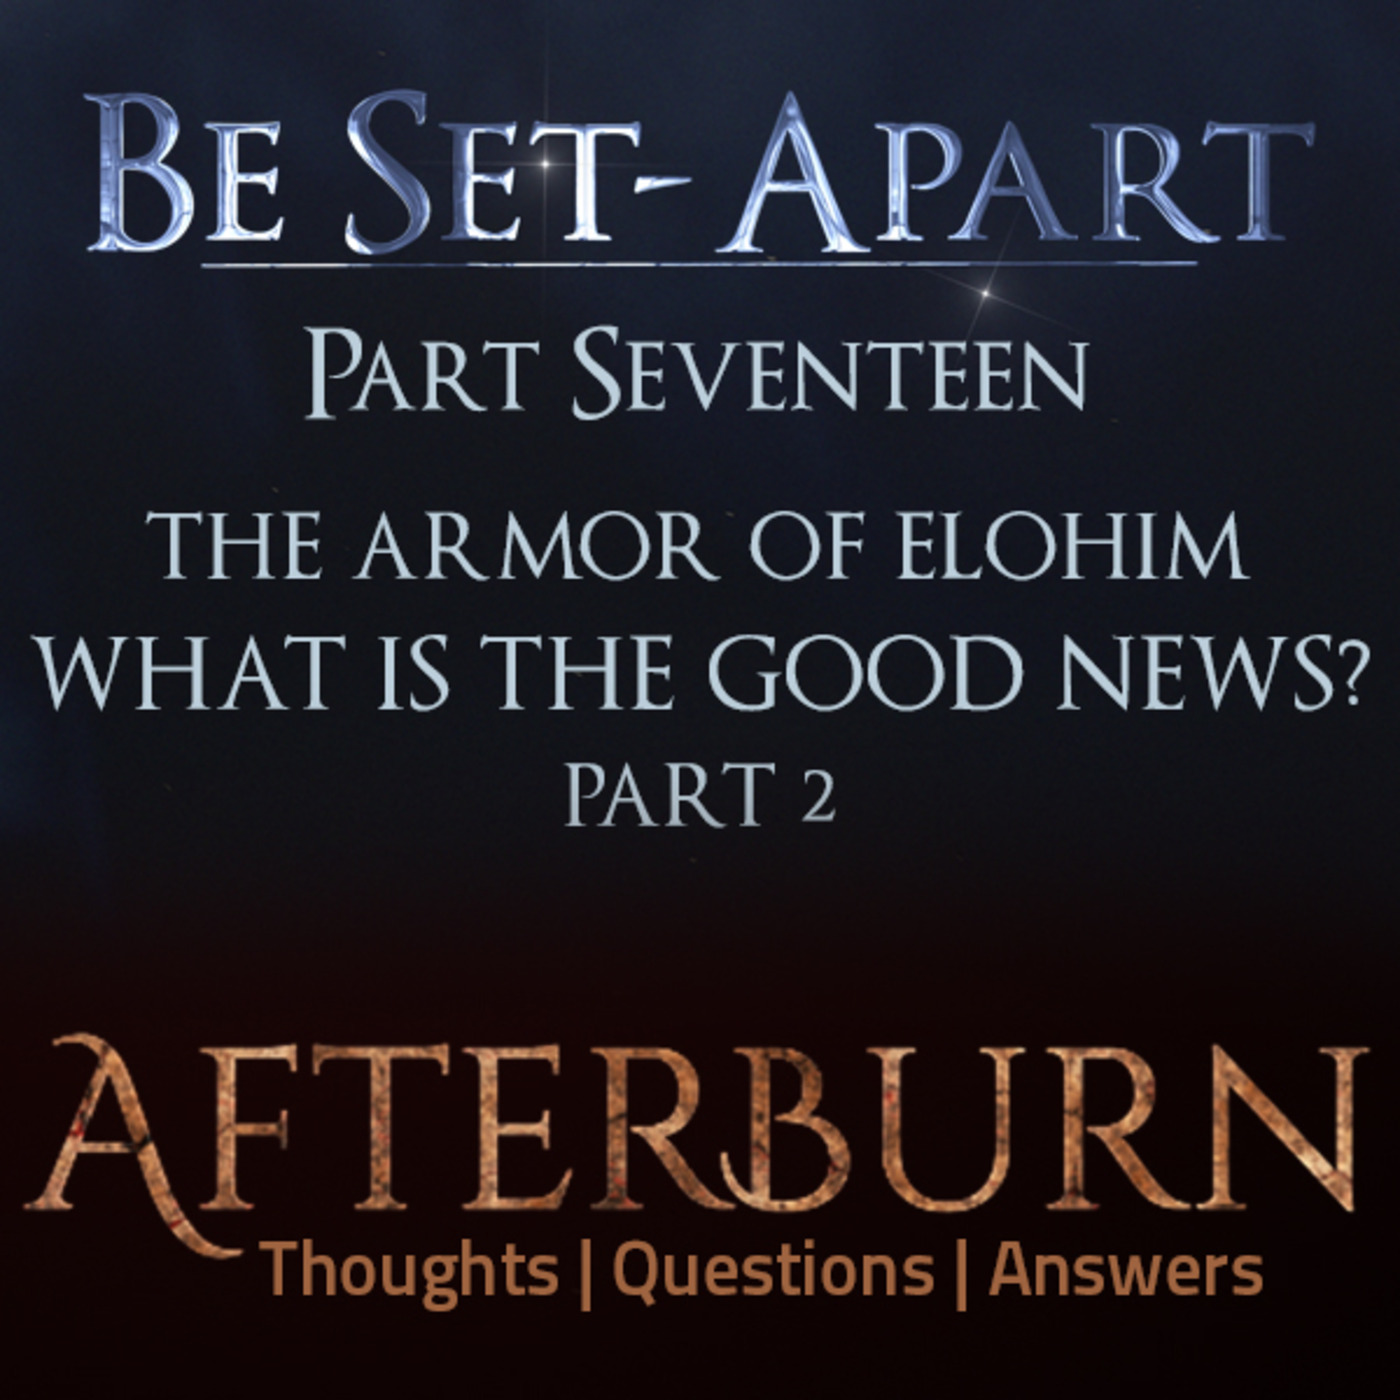 Episode 799: Afterburn | Be Set-Apart | Part Seventeen | The Armor of Elohim | What is the Good News? Part 2